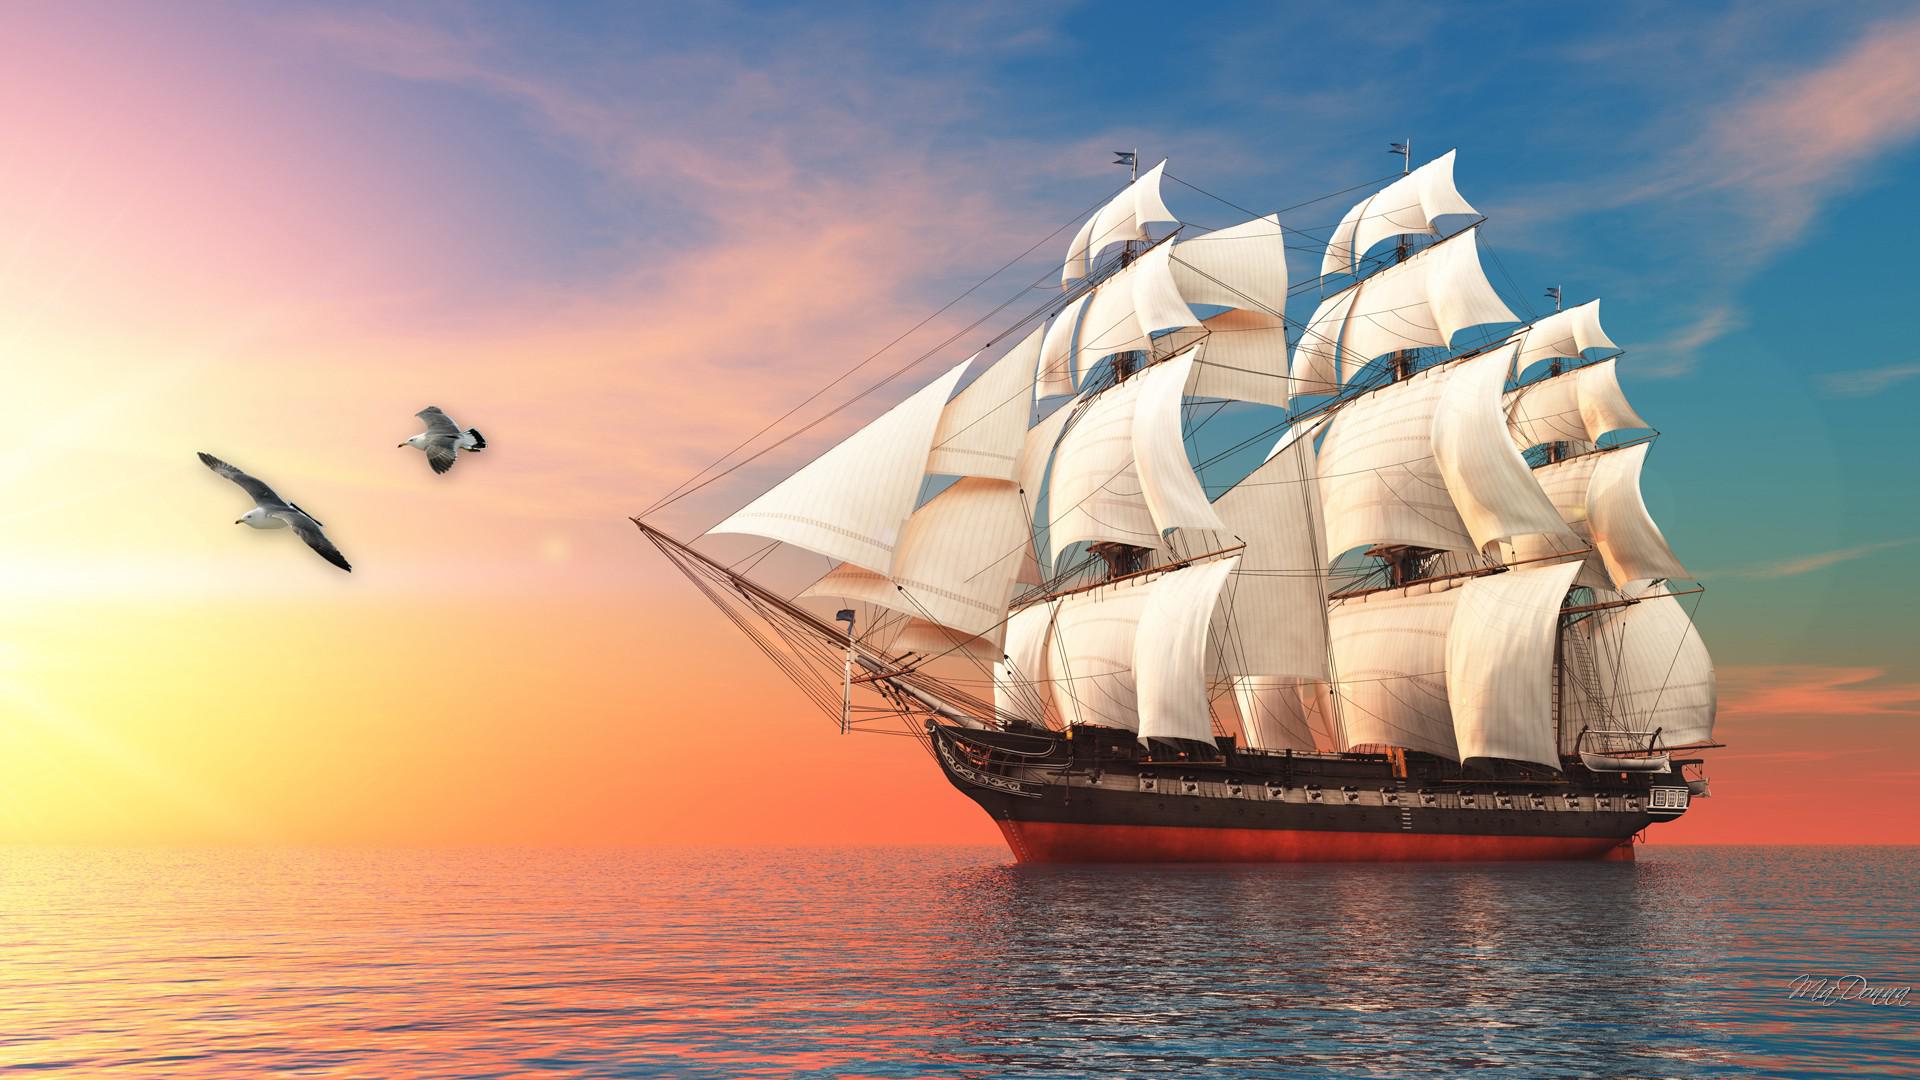 Tall ship at sunrise   106766   High Quality and Resolution